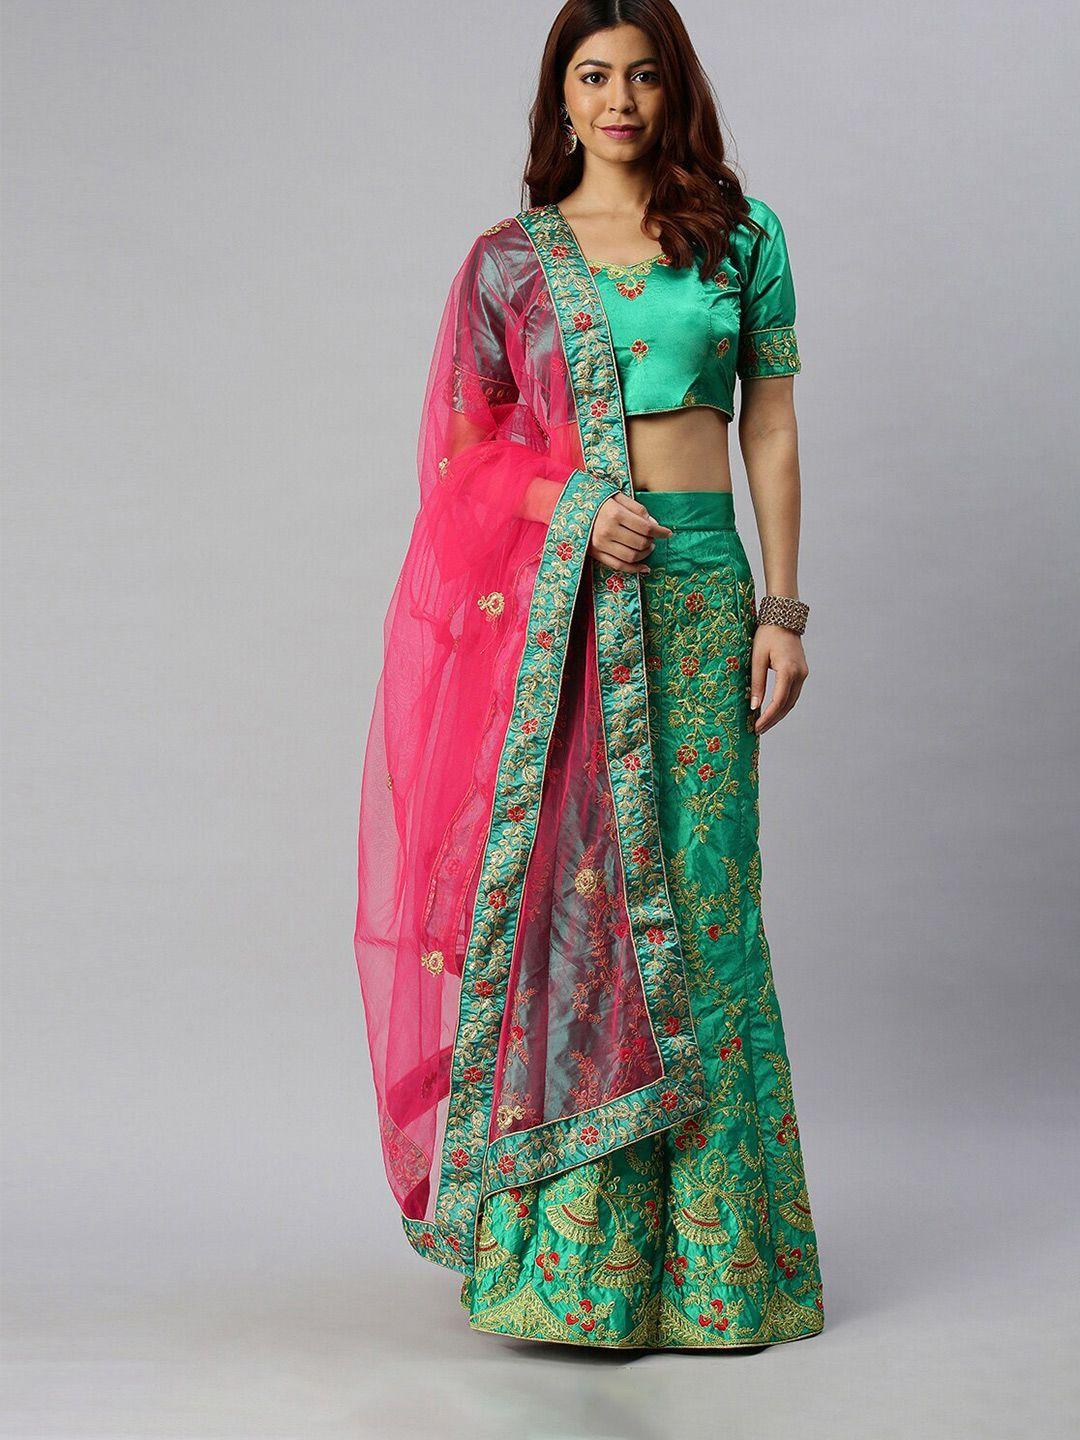 shadow & saining green & pink embroidered semi-stitched lehenga unstitched blouse with dupatta